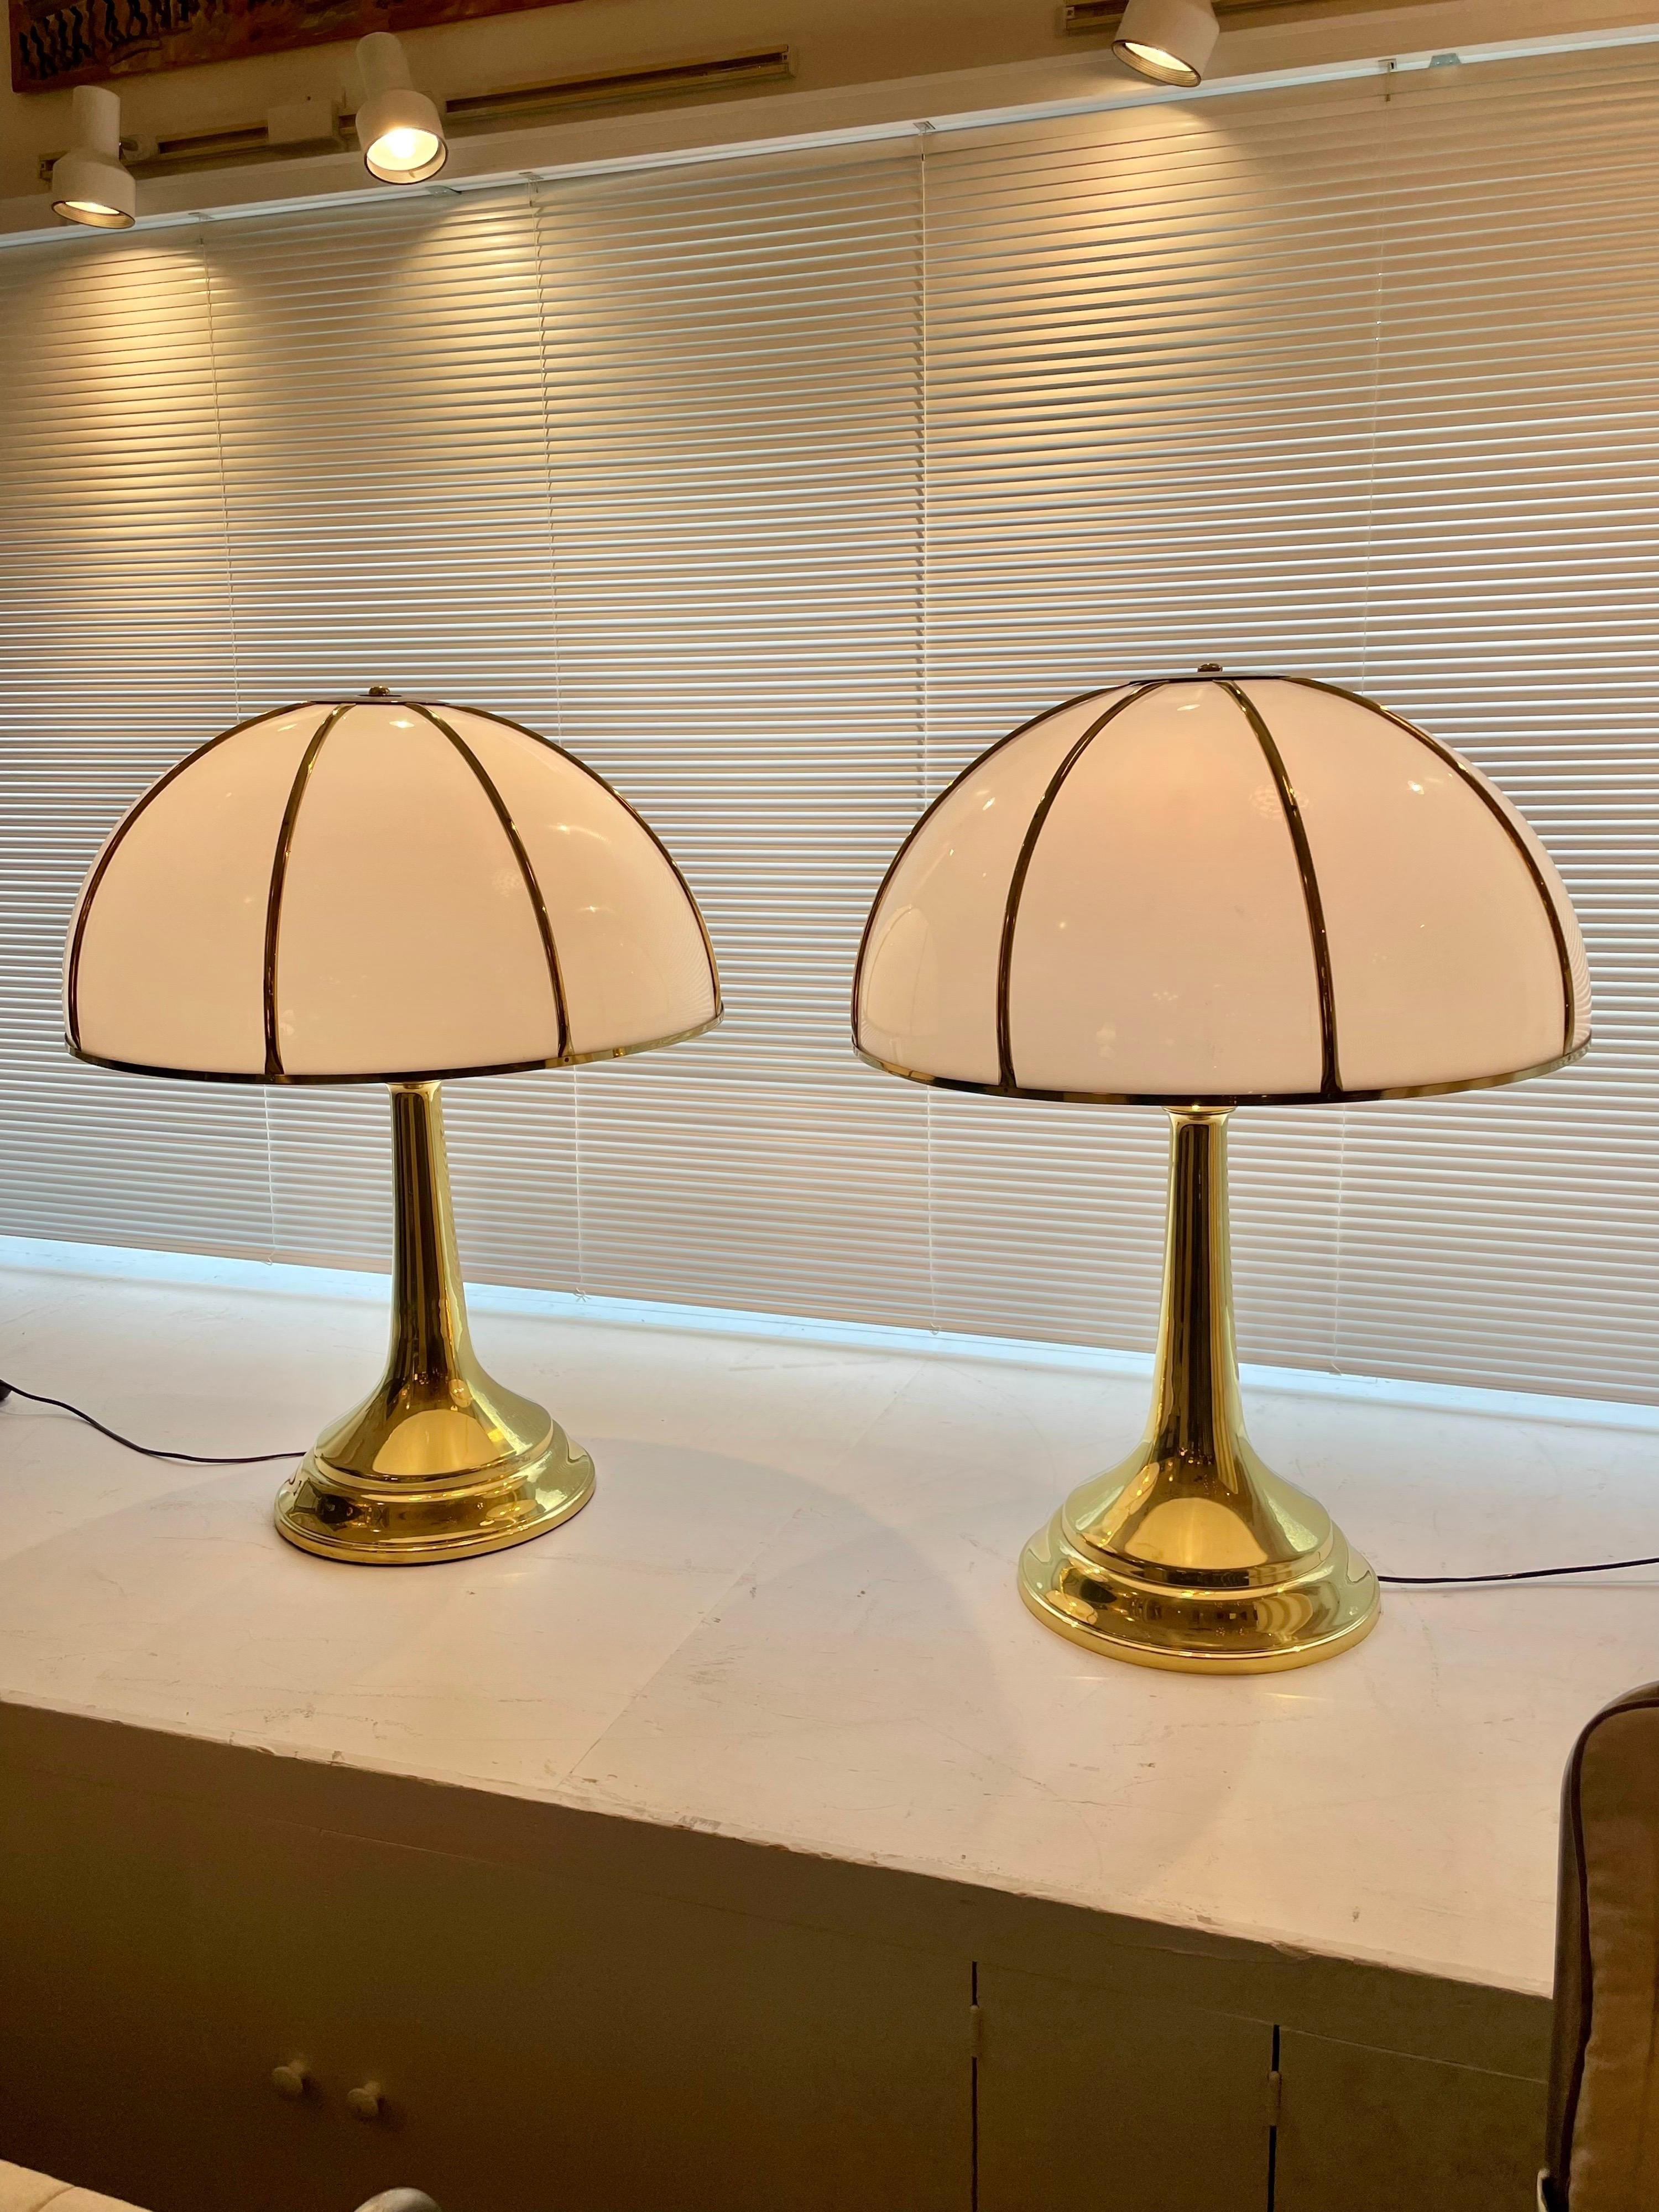 These are the largest Fungo lamps by Gabriella Crespi in brass base with white acrylic domed shades. They are double signed at the base and on the top of the lamp shade cap.